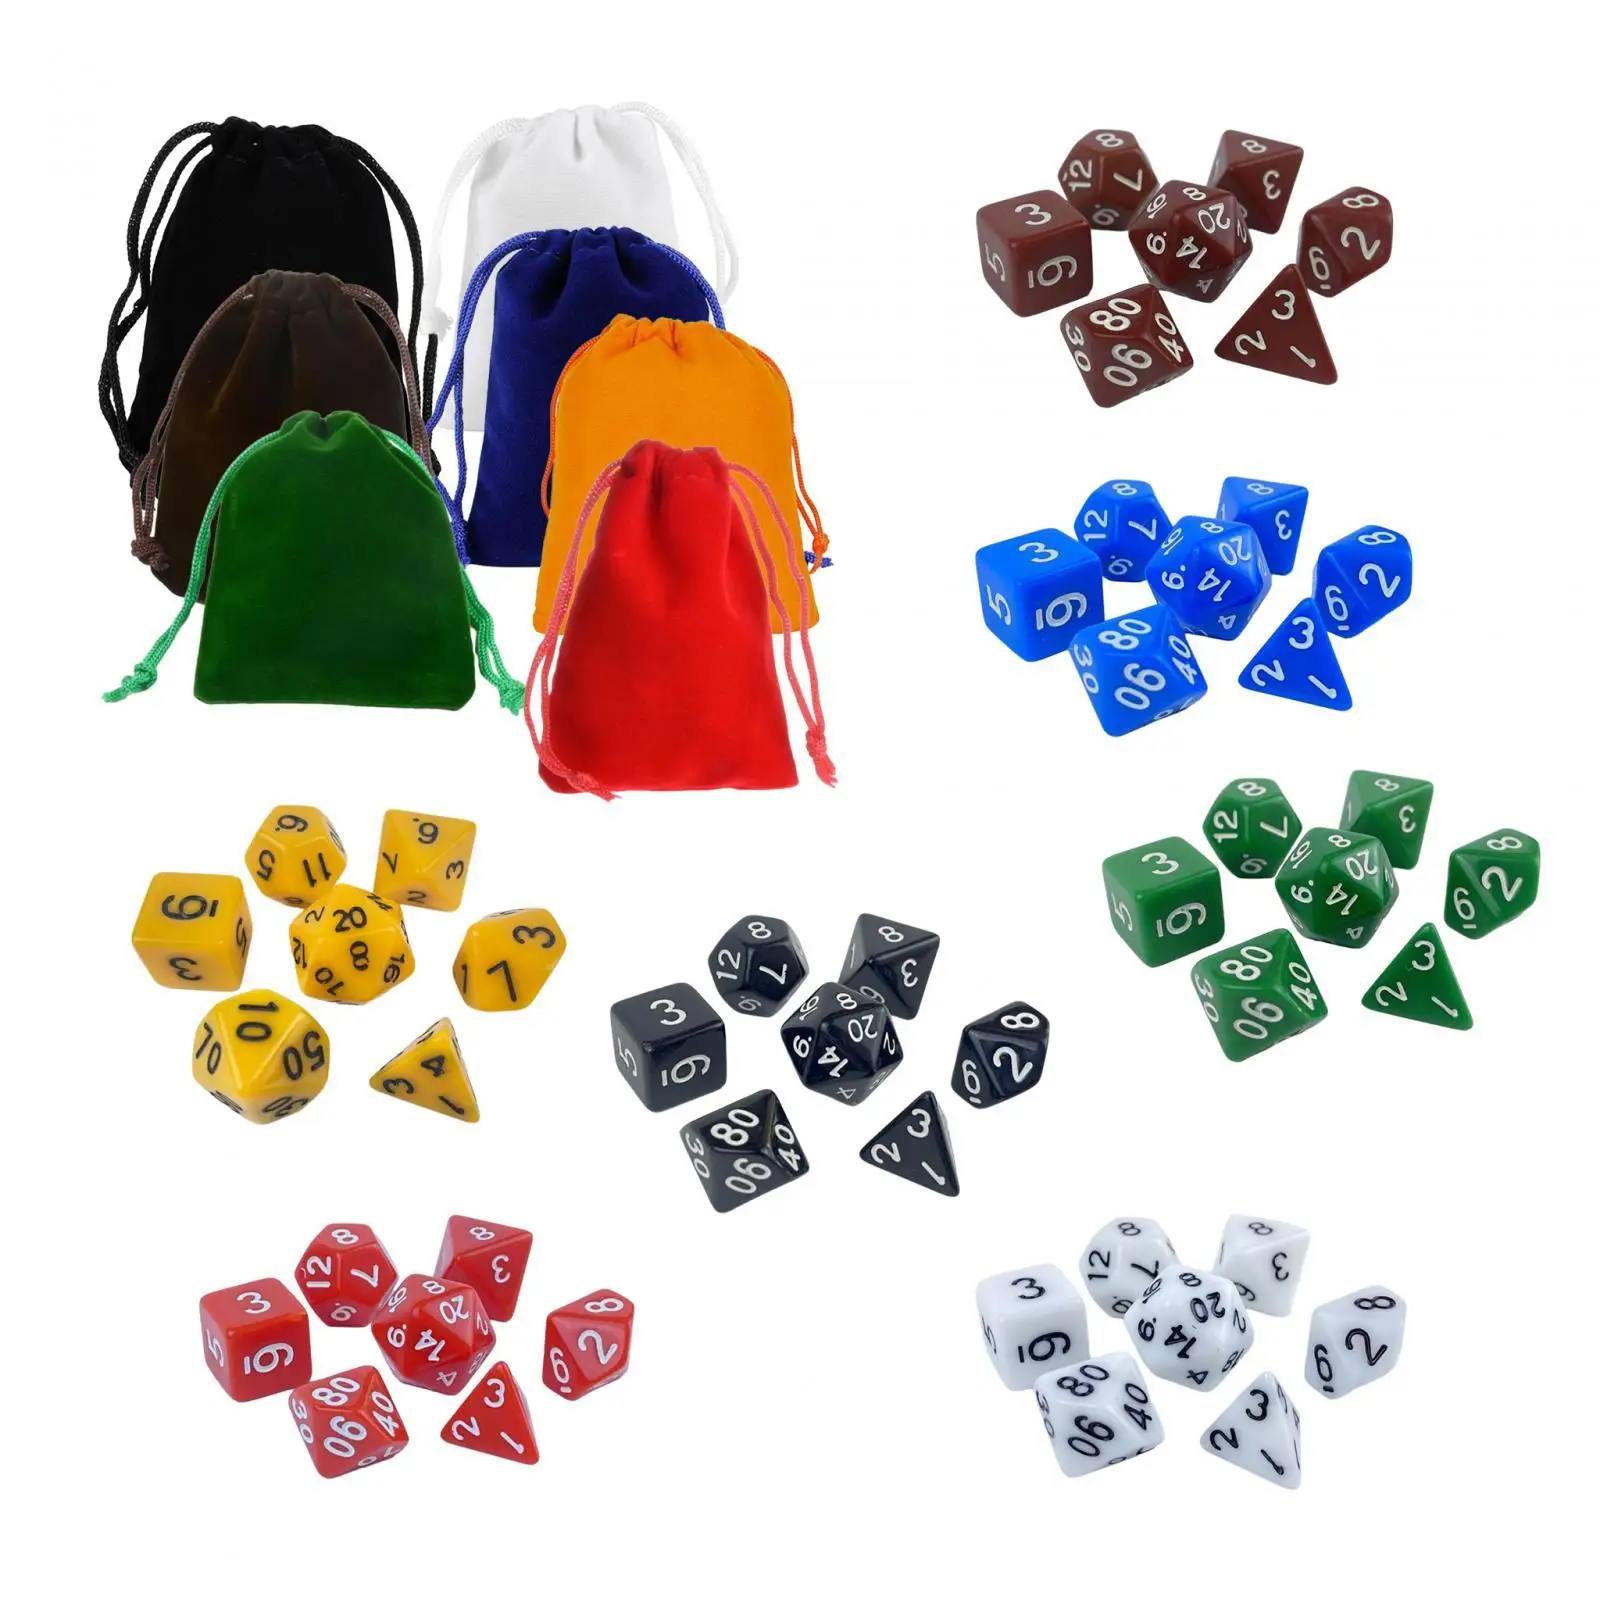 49x Dice Set Multi Sided Game Dices Math Teaching Toys Polyhedral Dices with Storage Bag for KTV Party Bar, Role Playing Game